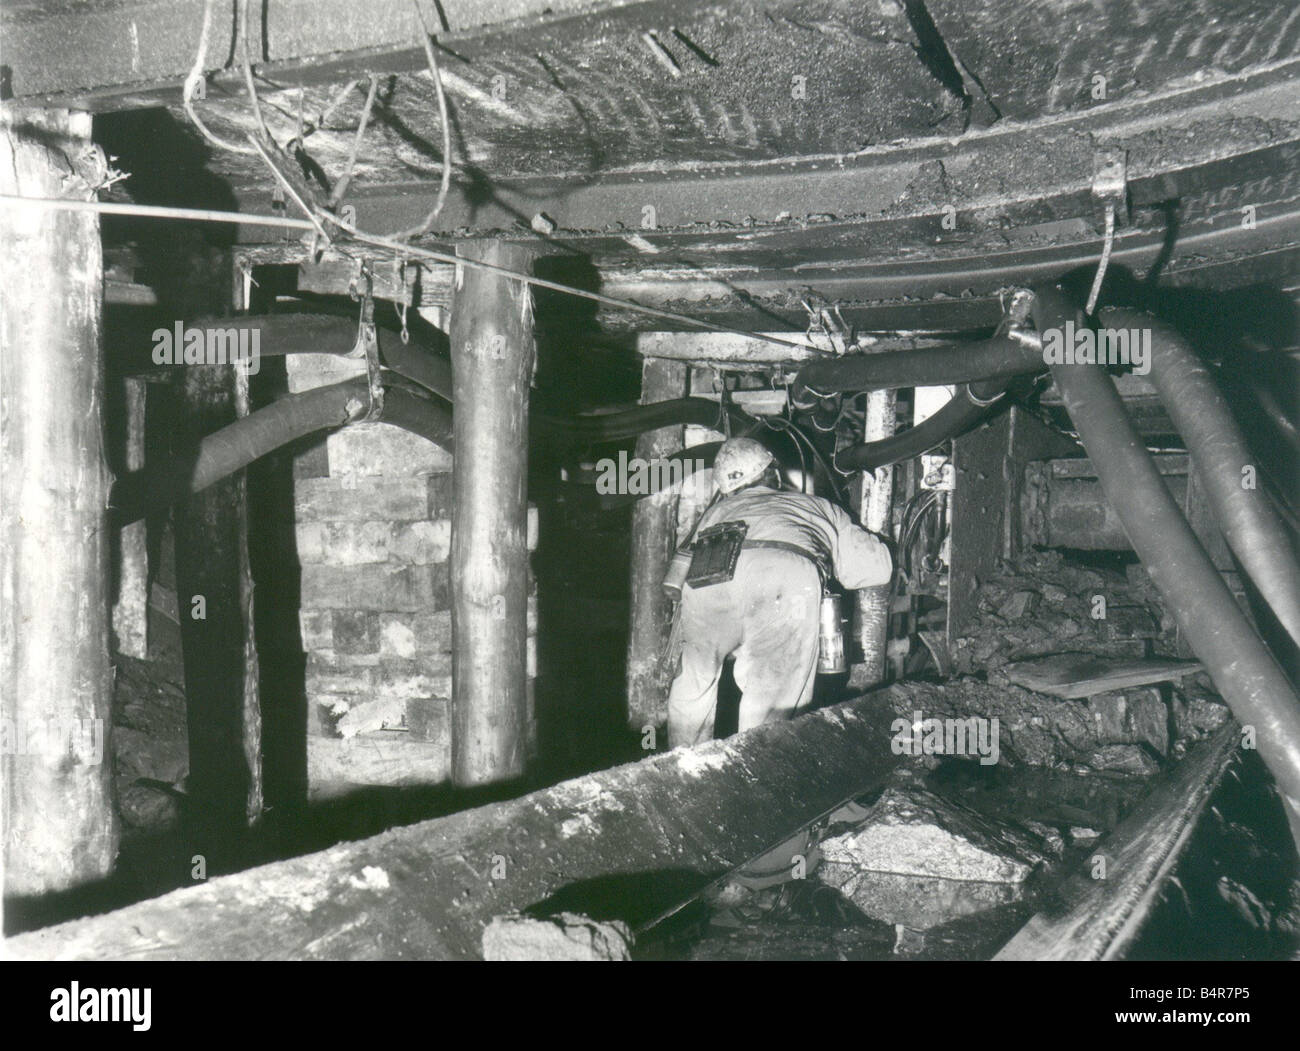 The cramped conditions at Ellington Colliery near the pit s most productive face Pressure had lowered the roof by nearly three feet trapping equipment October 1984 Stock Photo